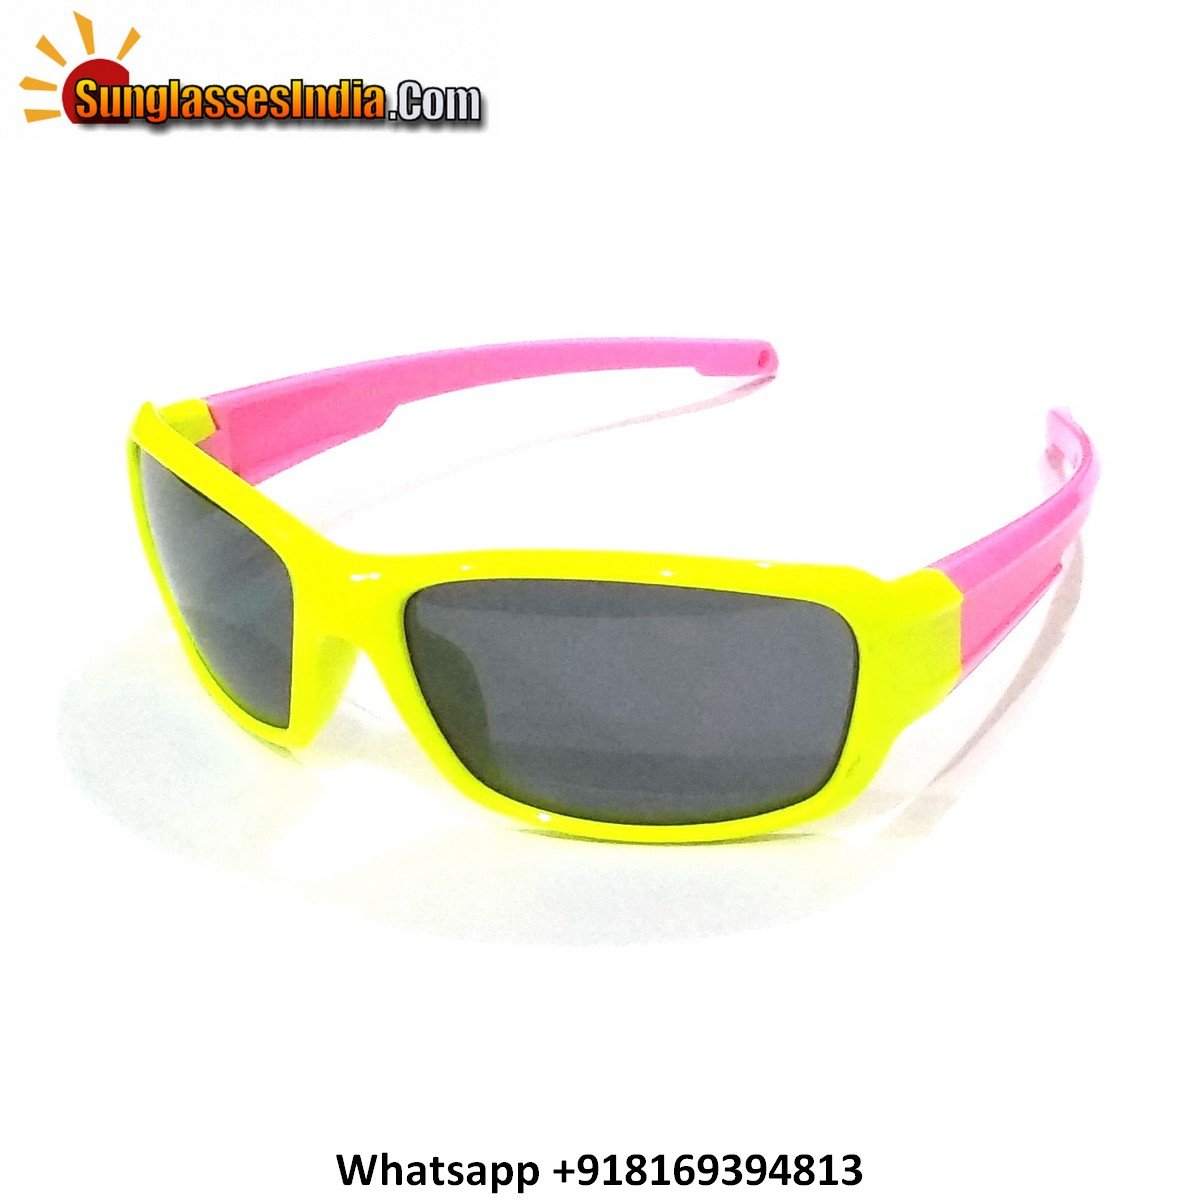 Unbreakable Kids Polarized Sunglasses Light Weight TR Material S8193YellowPink